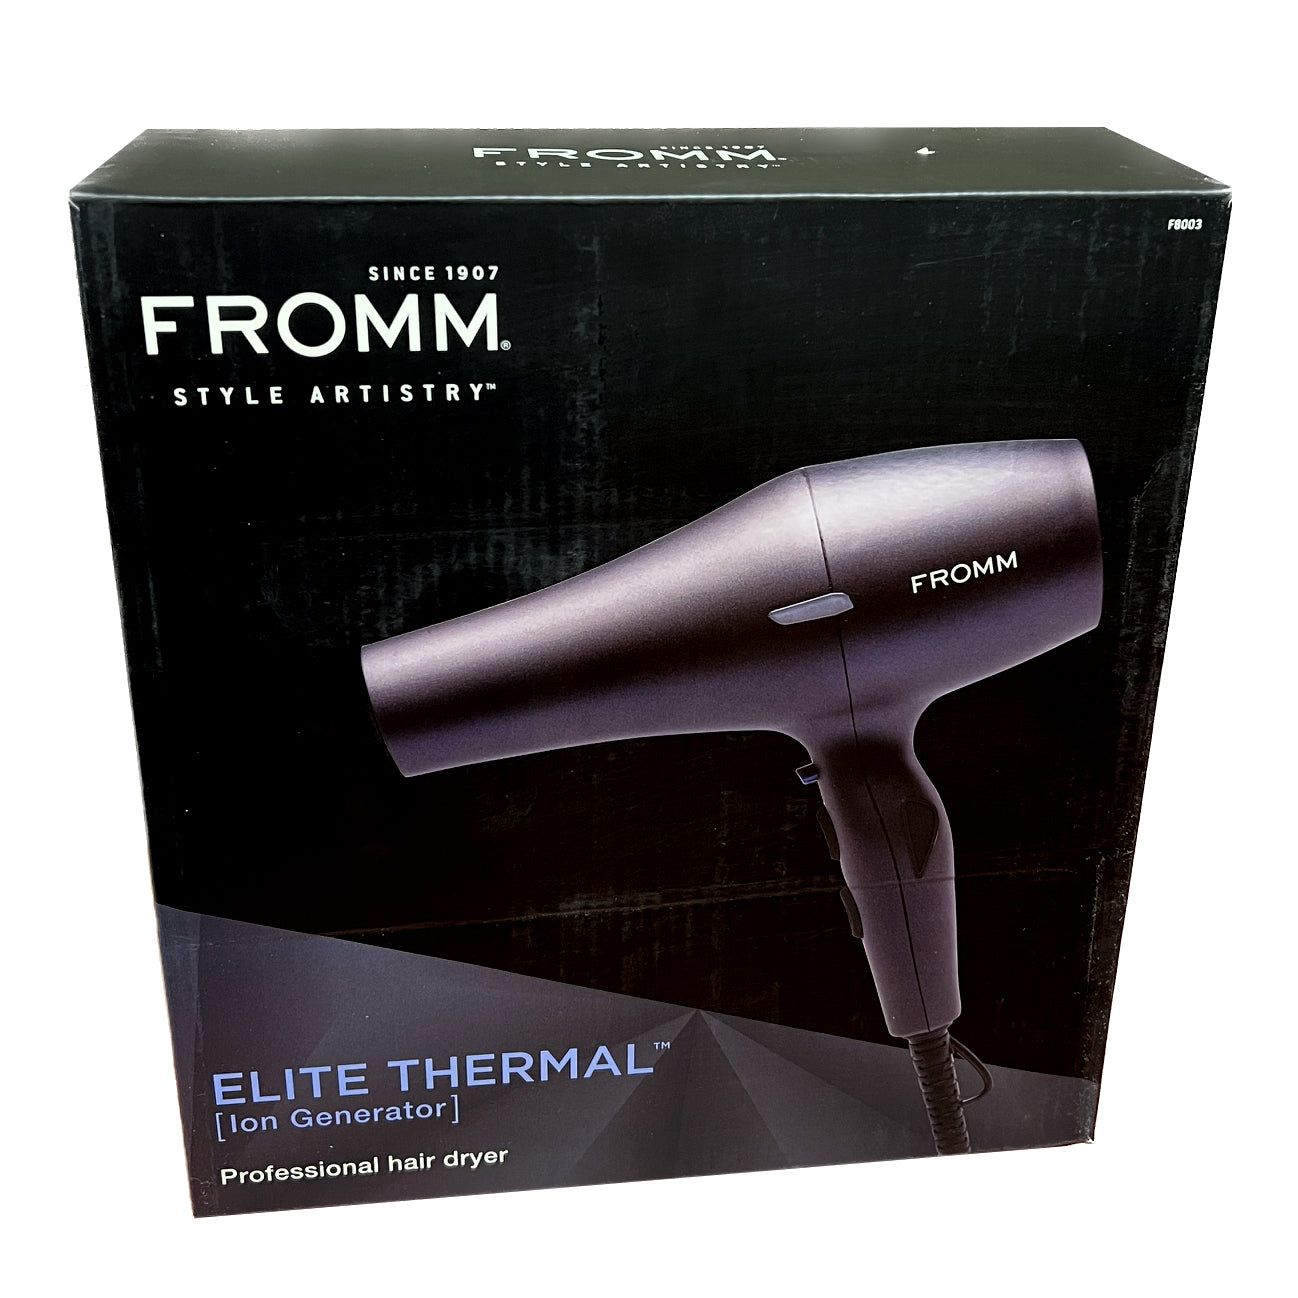 Elite Thermal [Ion Generator] Professional Hair Dryer | F8003 | FROMM HAIR DRYERS FROMM 